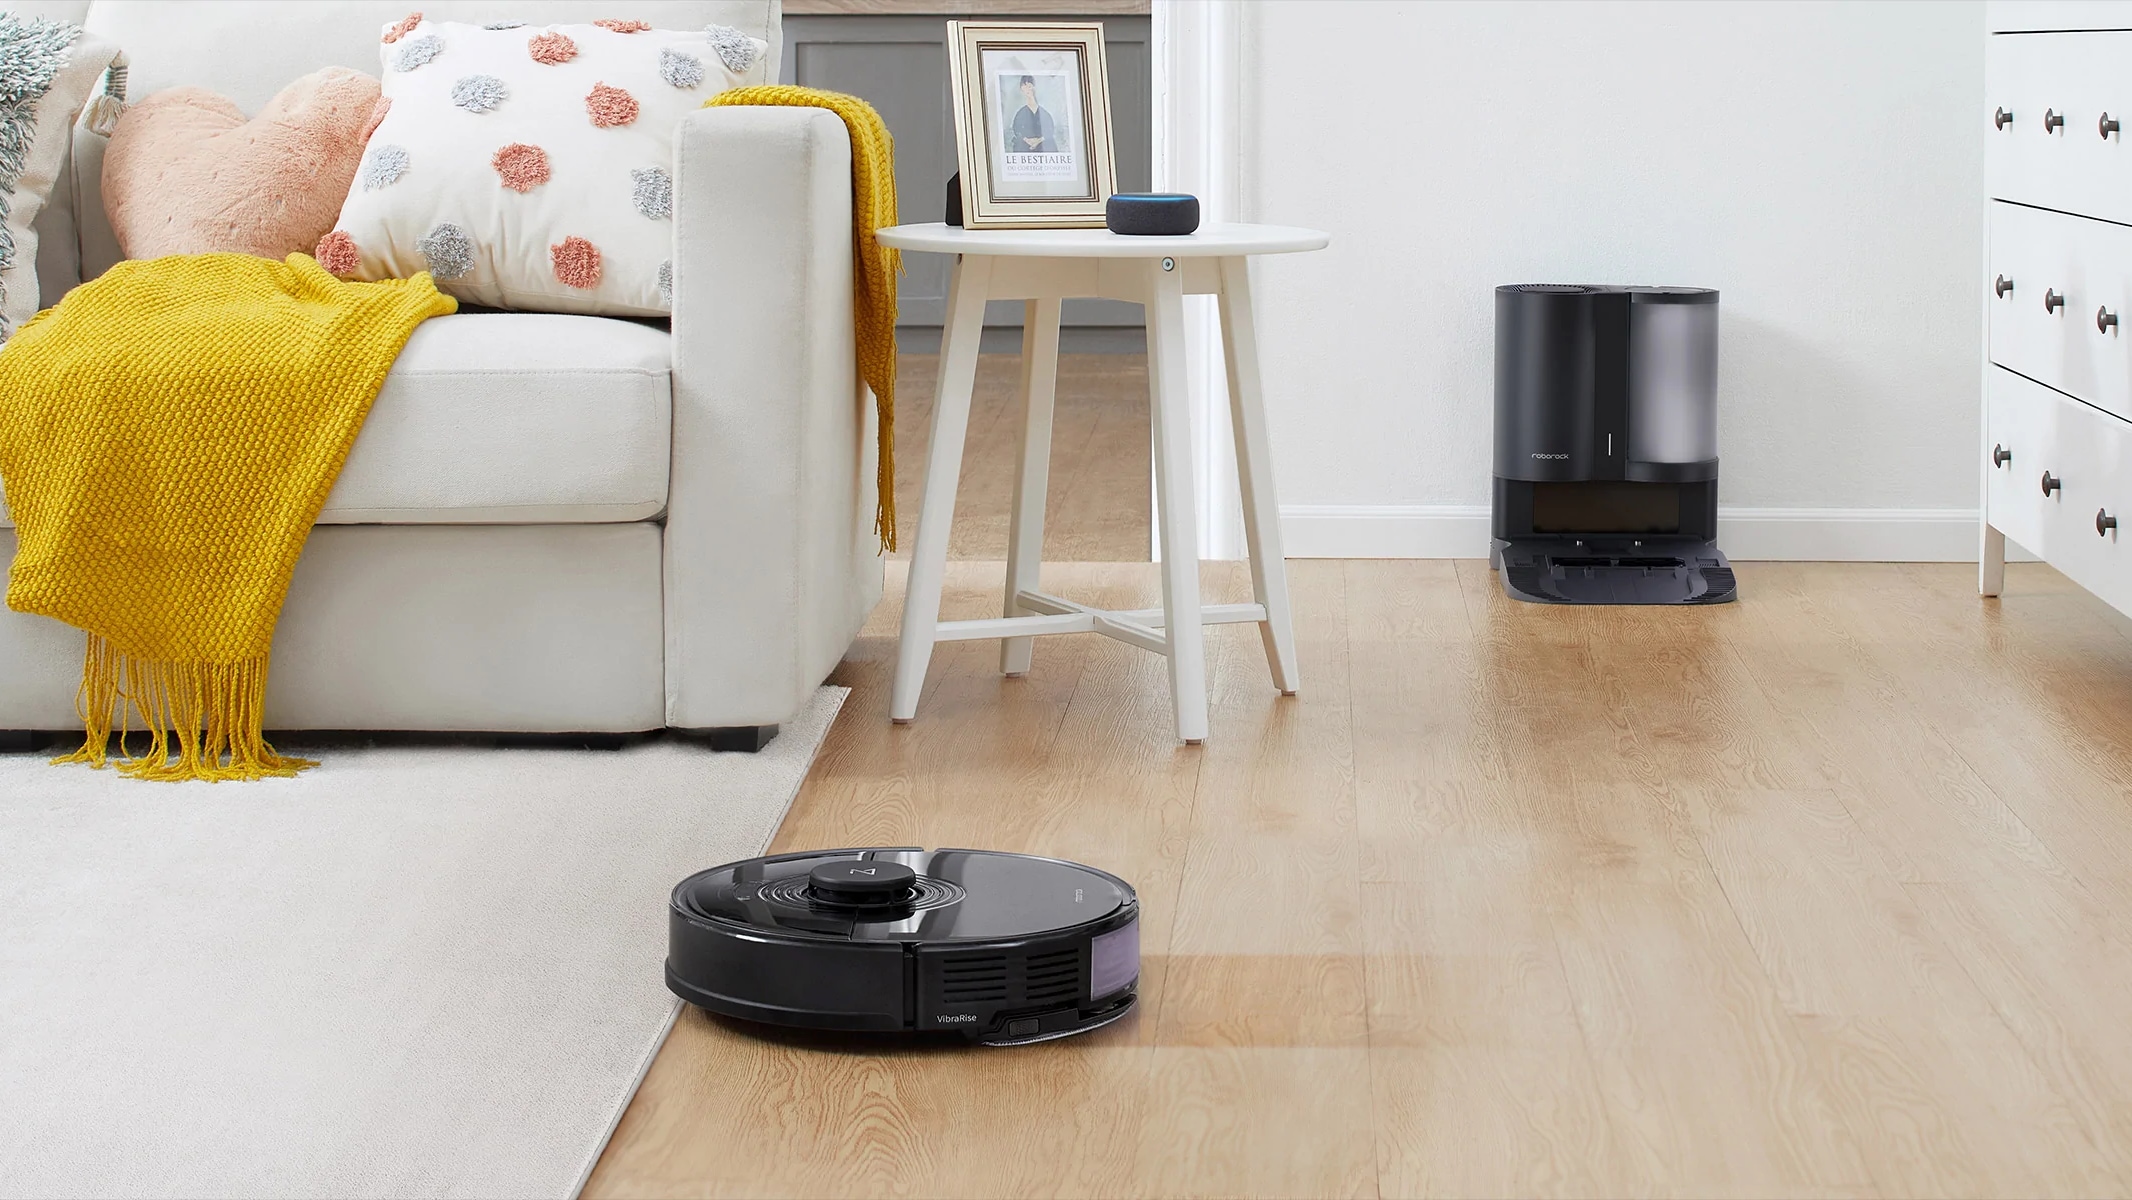 Roborock brings you incredible deals on smart robot vacuums and mops for its anniversary sale